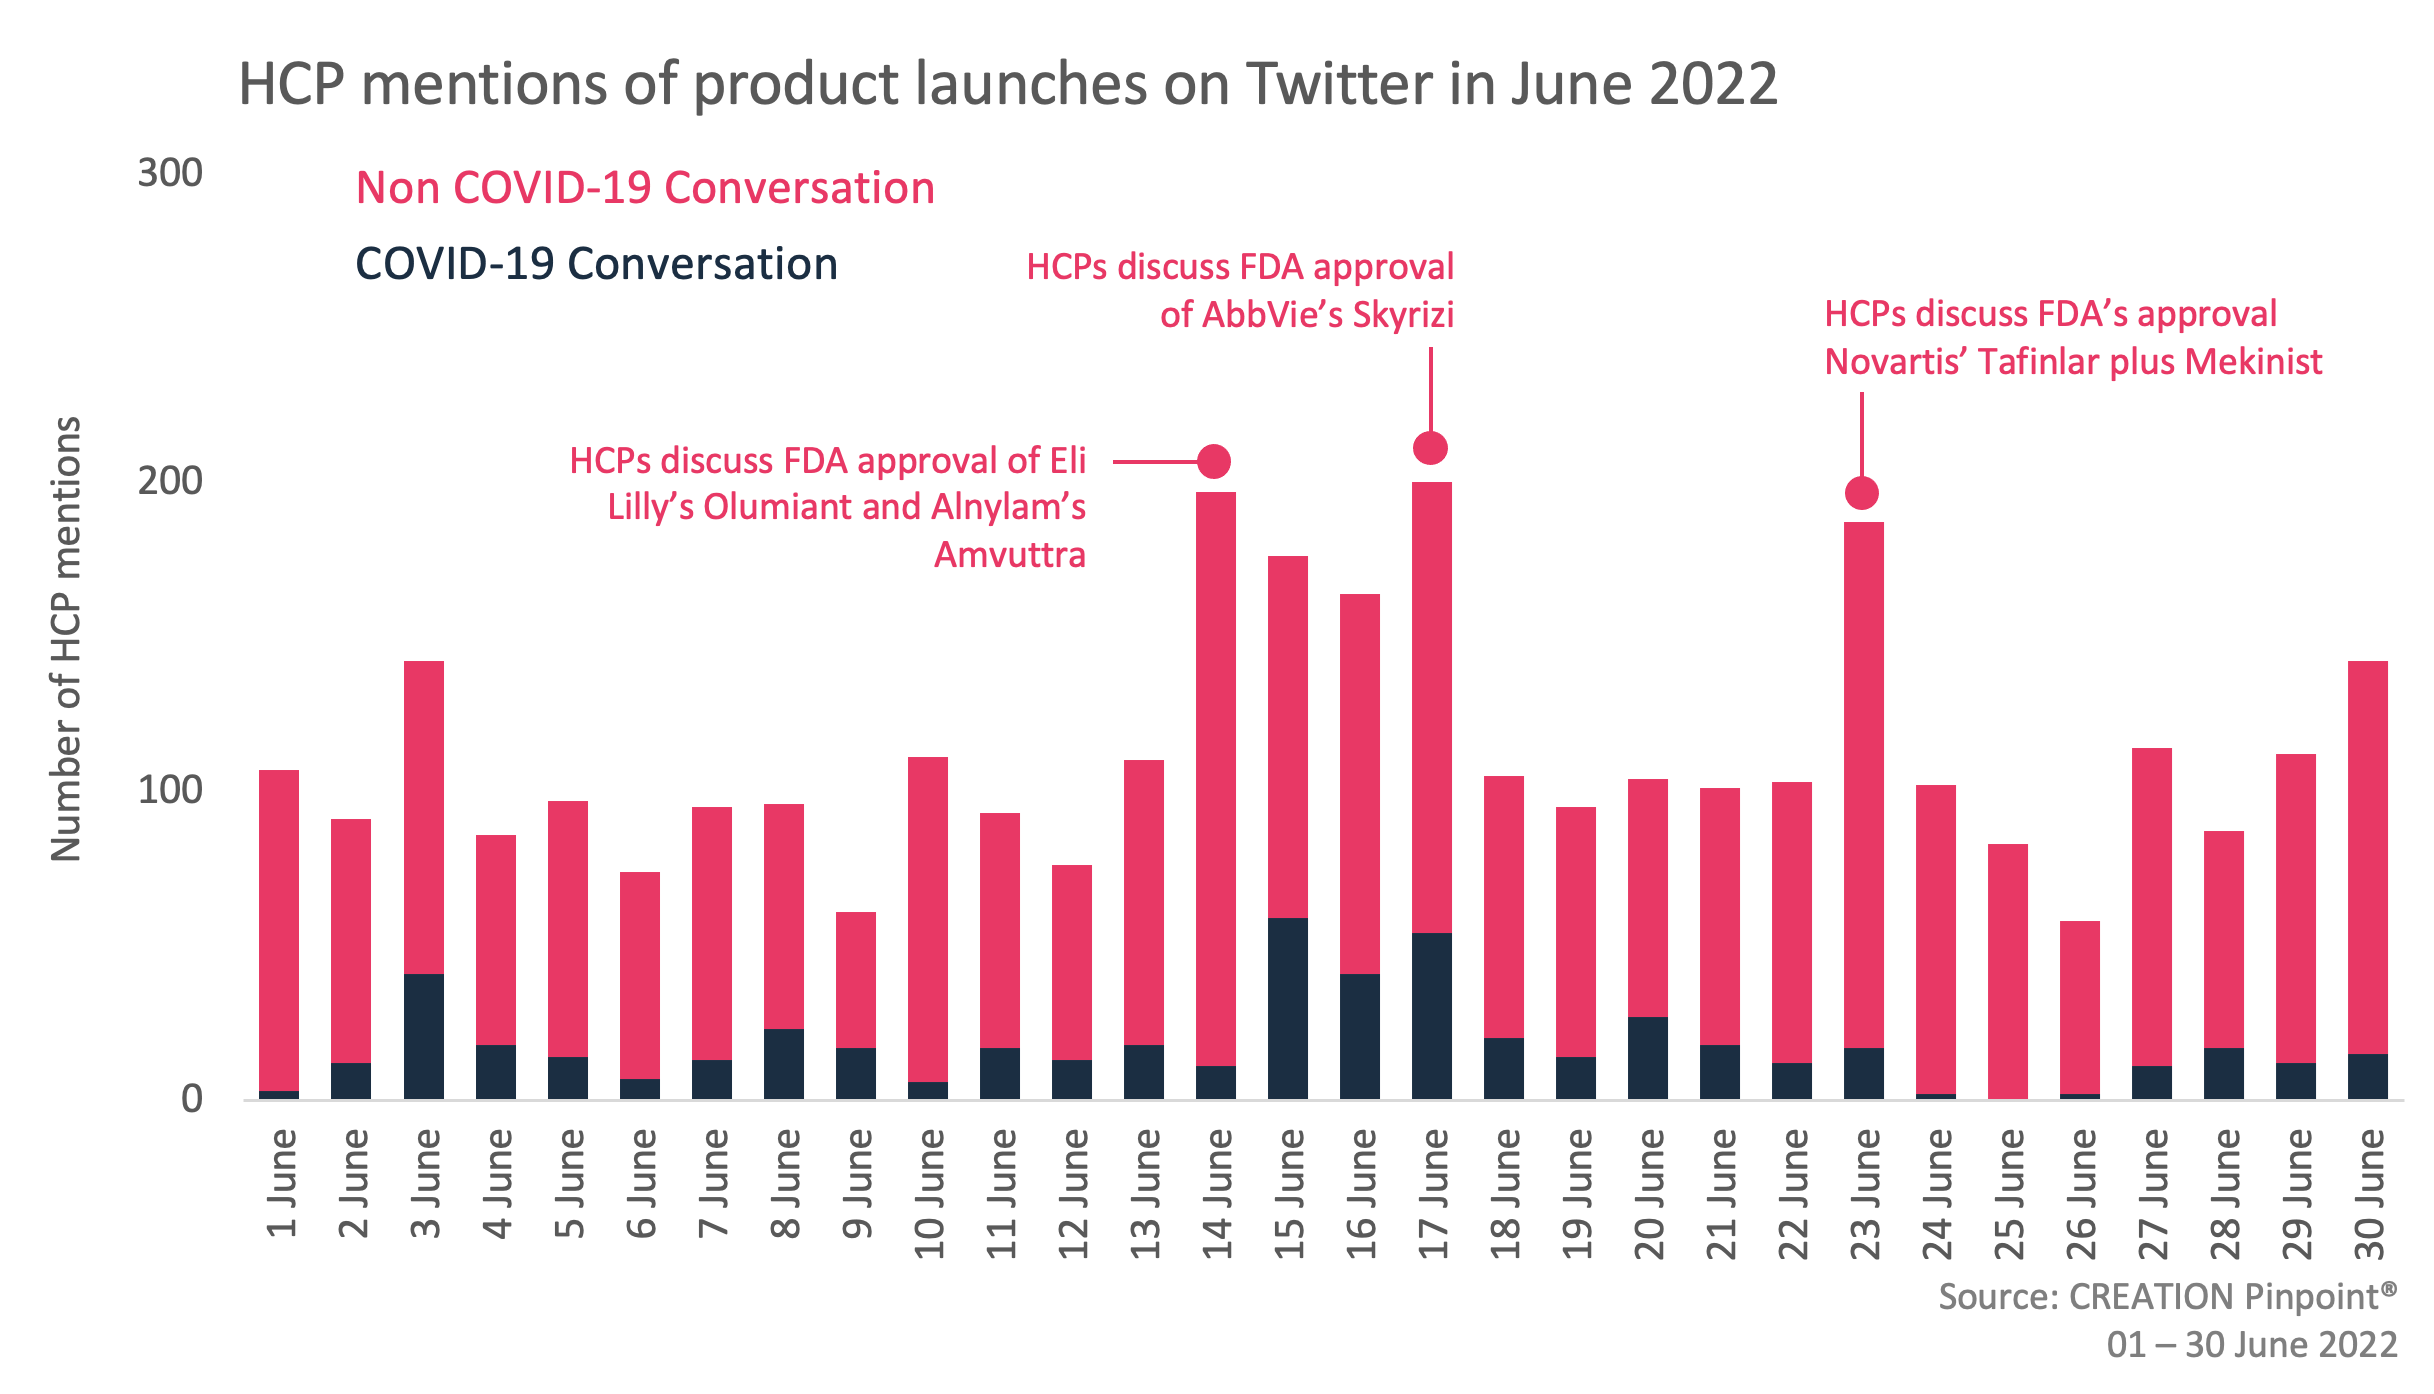 A graph showing HCP mentions of product launches on Twitter in June 2022